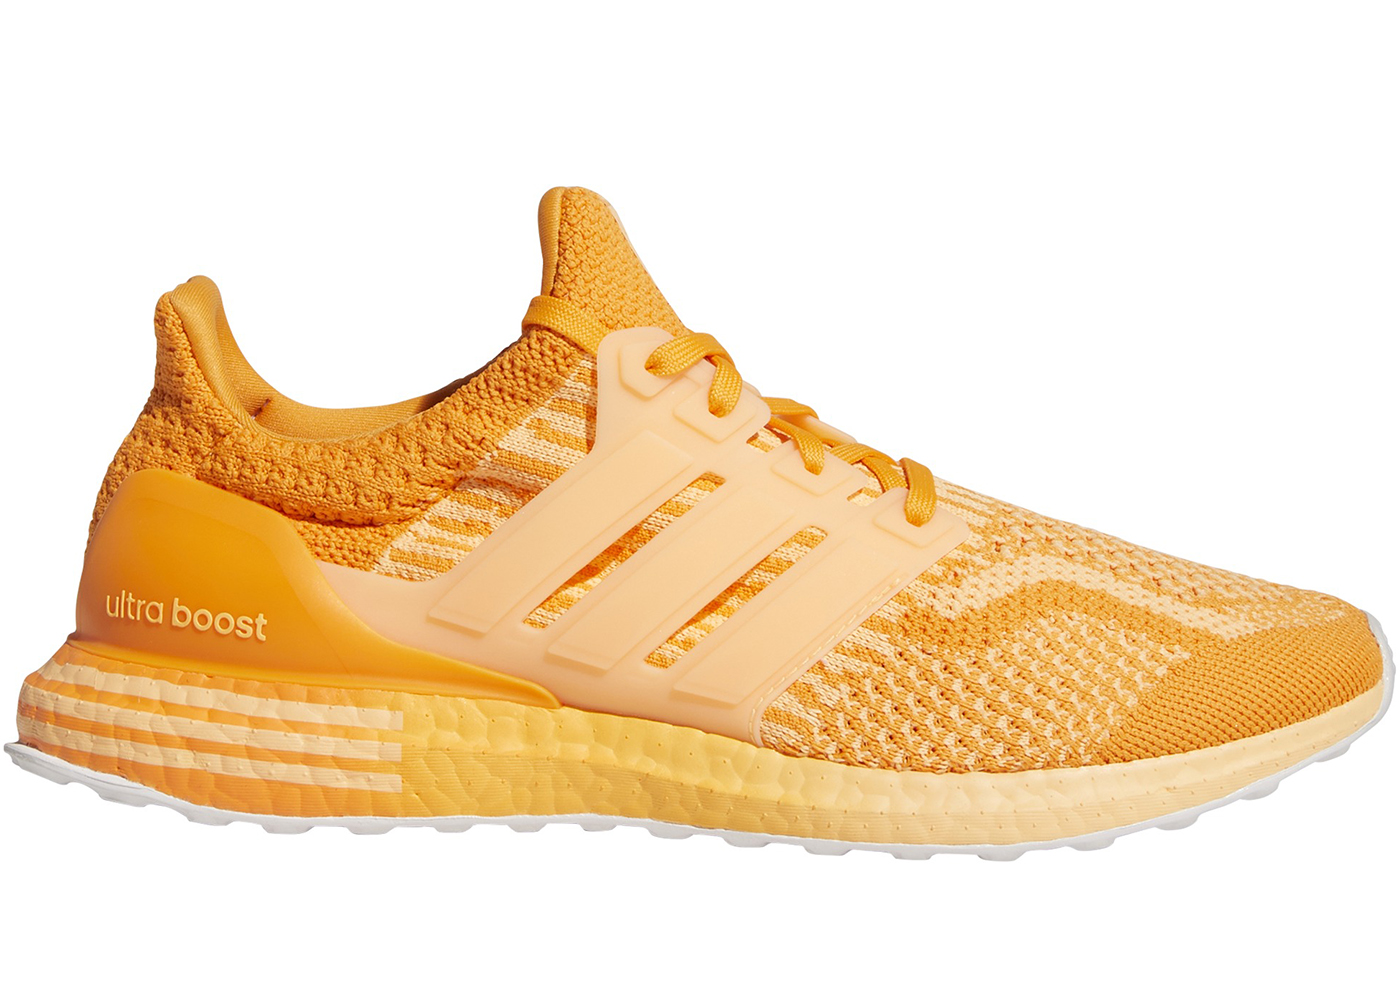 adidas ultra boost 5.0 dna shoes